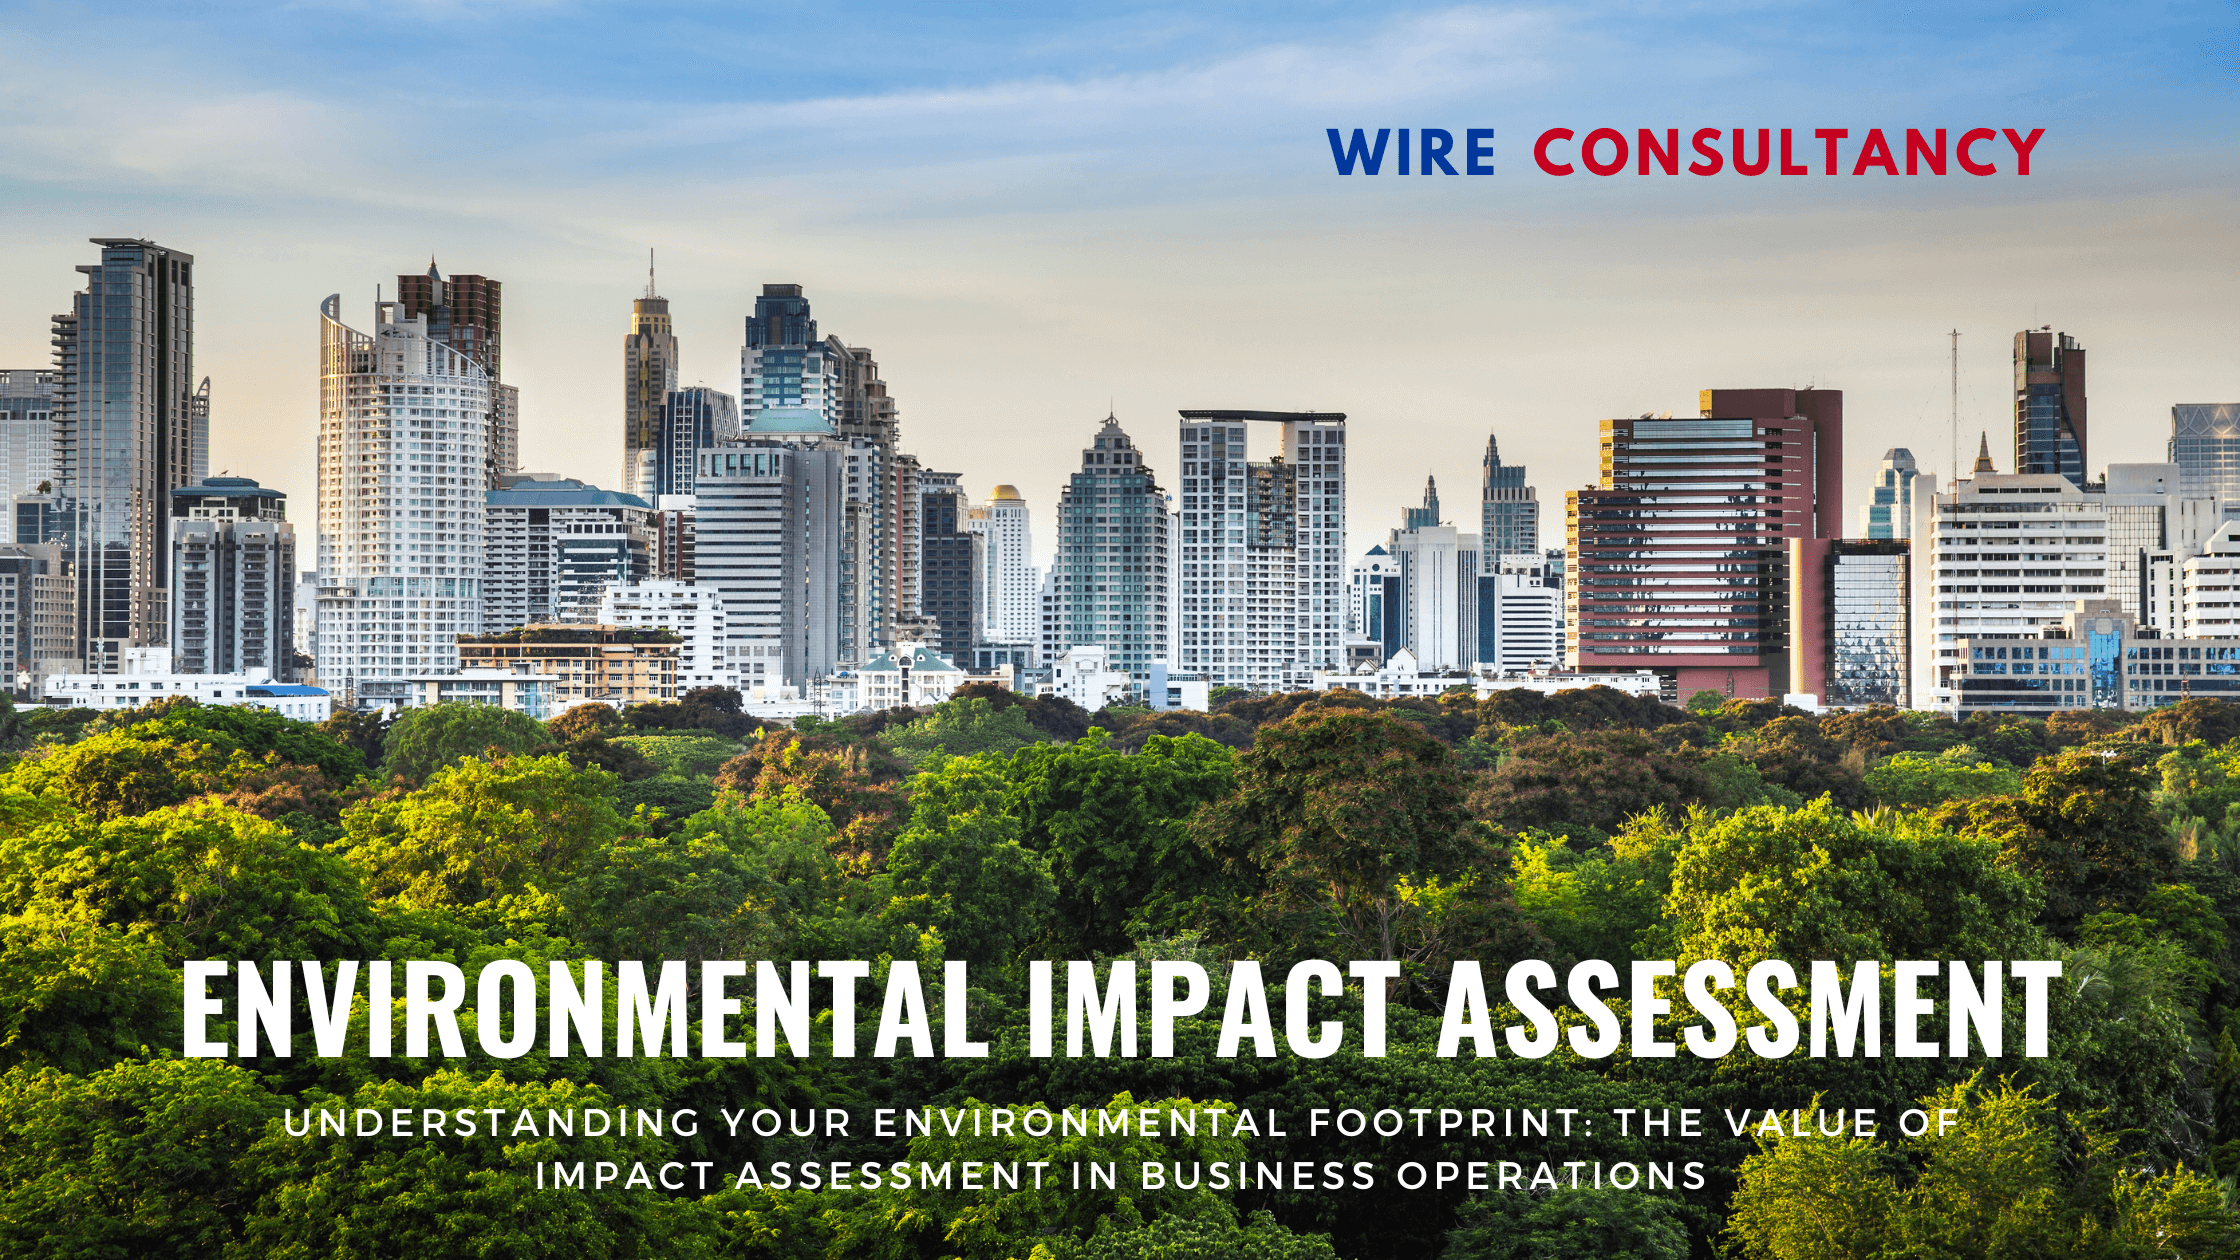 Understanding Your Environmental Footprint: The Value of Impact Assessment in Business Operations